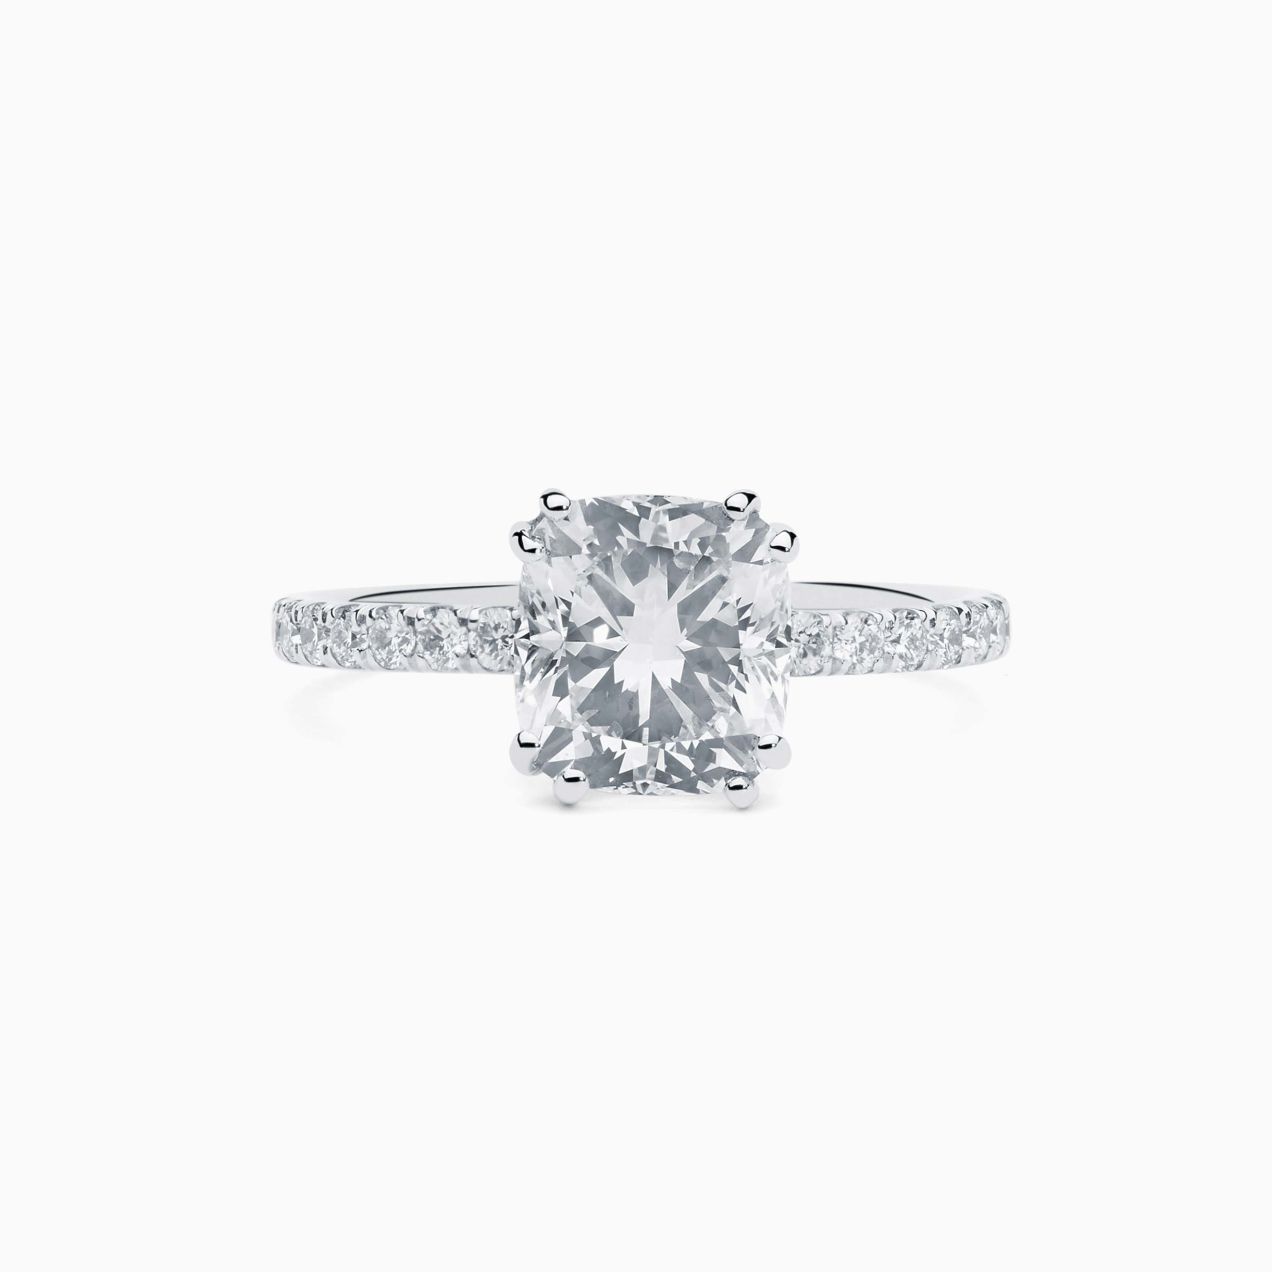 White gold with diamond in the center and arm with diamonds solitaire ring